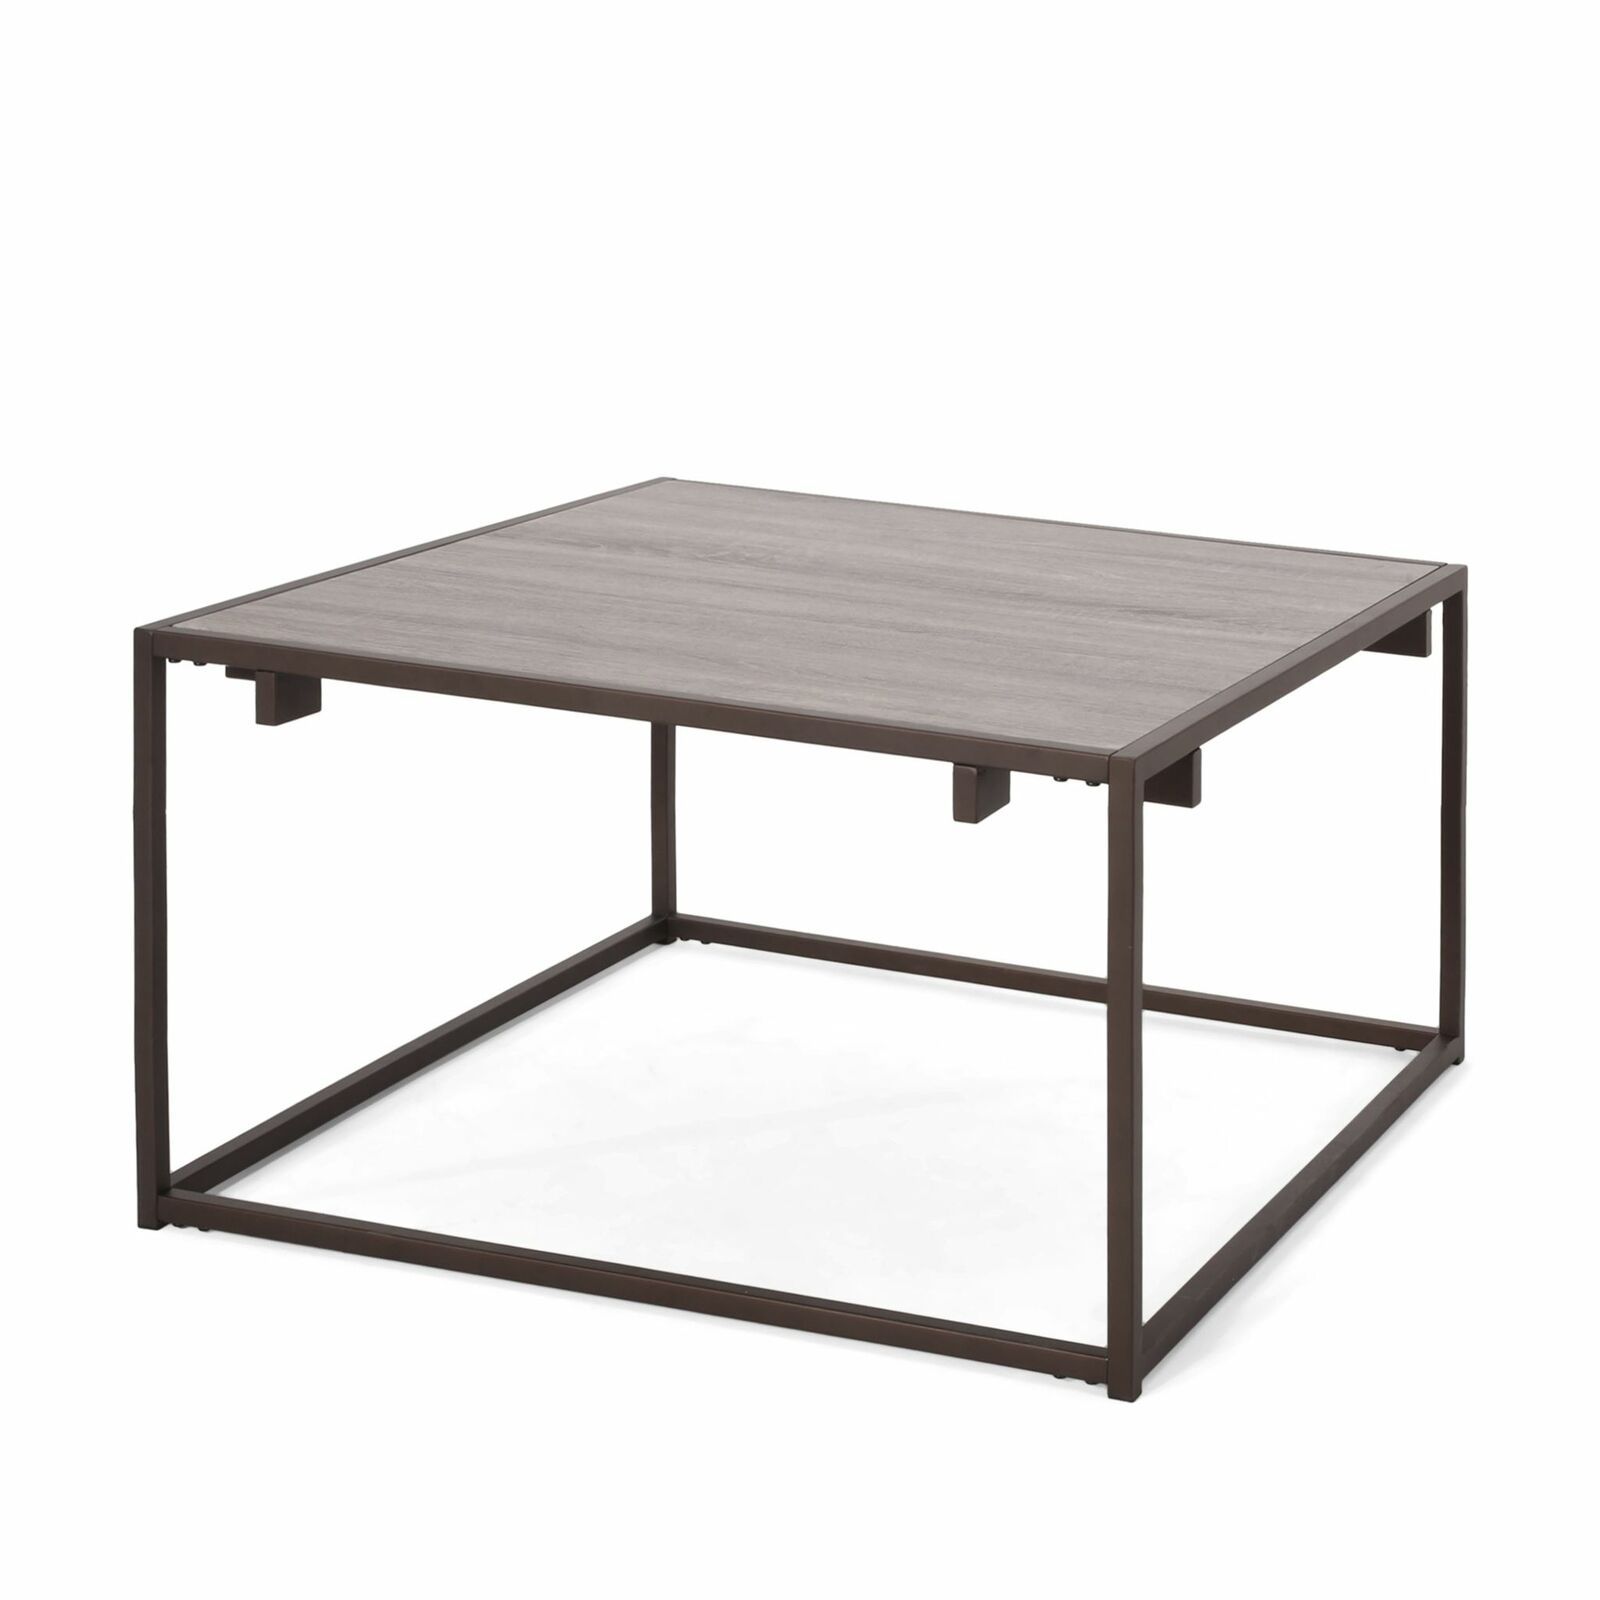 Modern Industrial Faux Wood Square Coffee Table | Ebay In Industrial Faux Wood Coffee Tables (View 5 of 20)